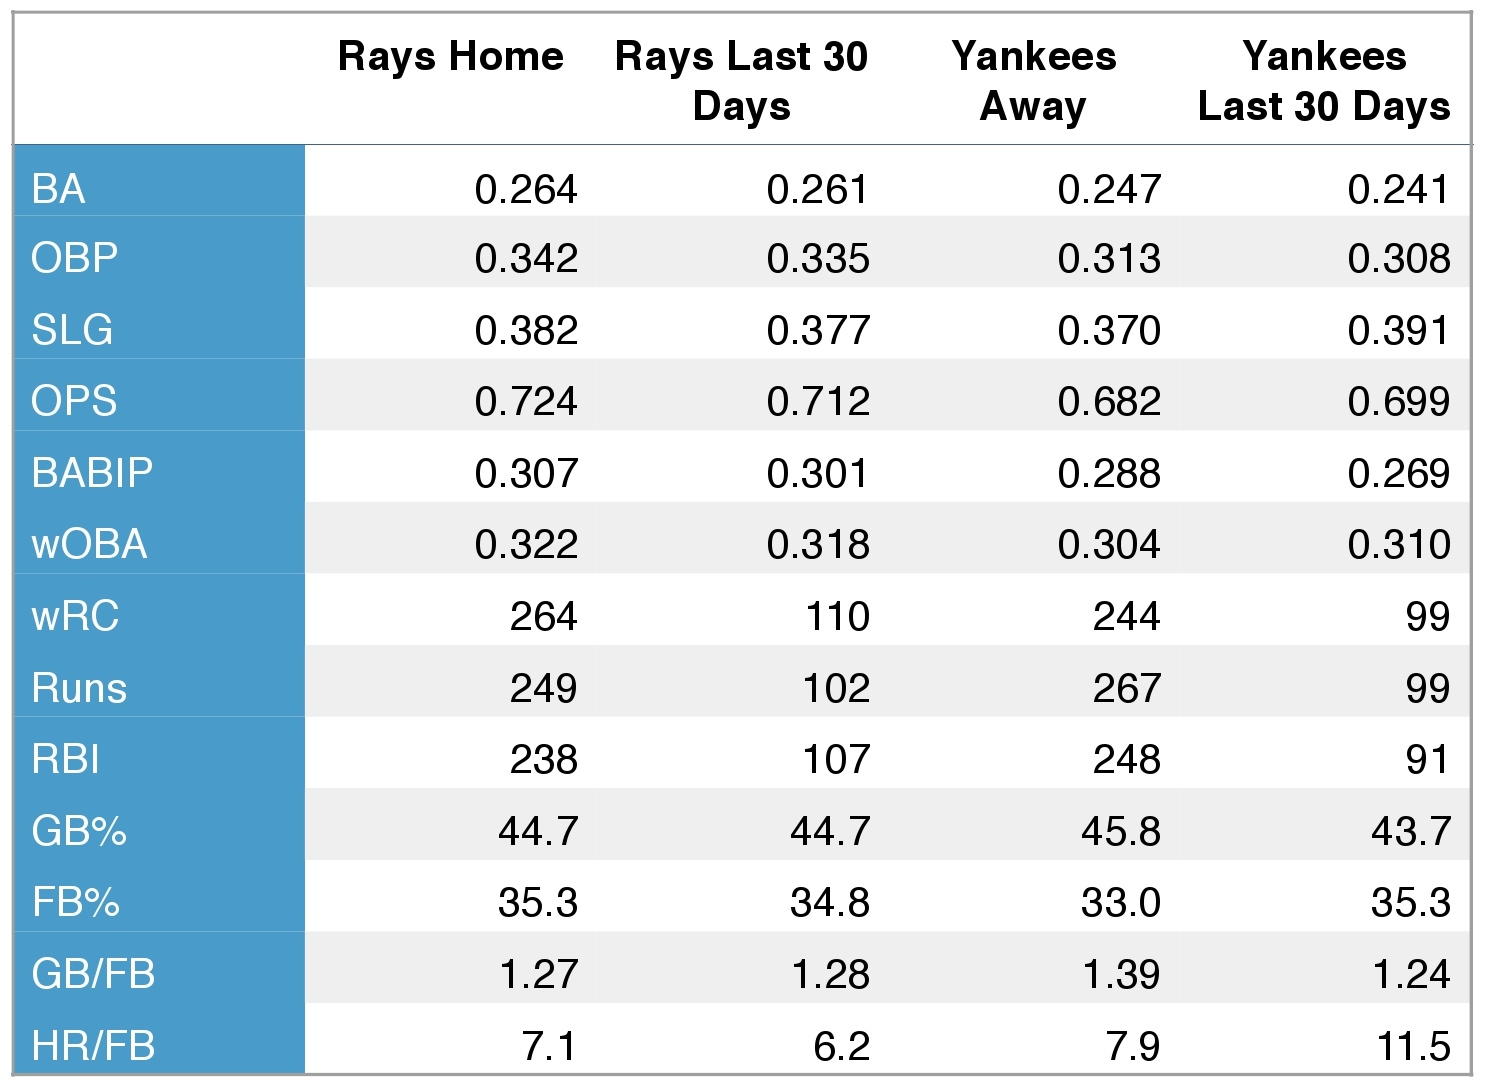 Rays and Yankees offensive production (at home, away, and over the last 30 days).